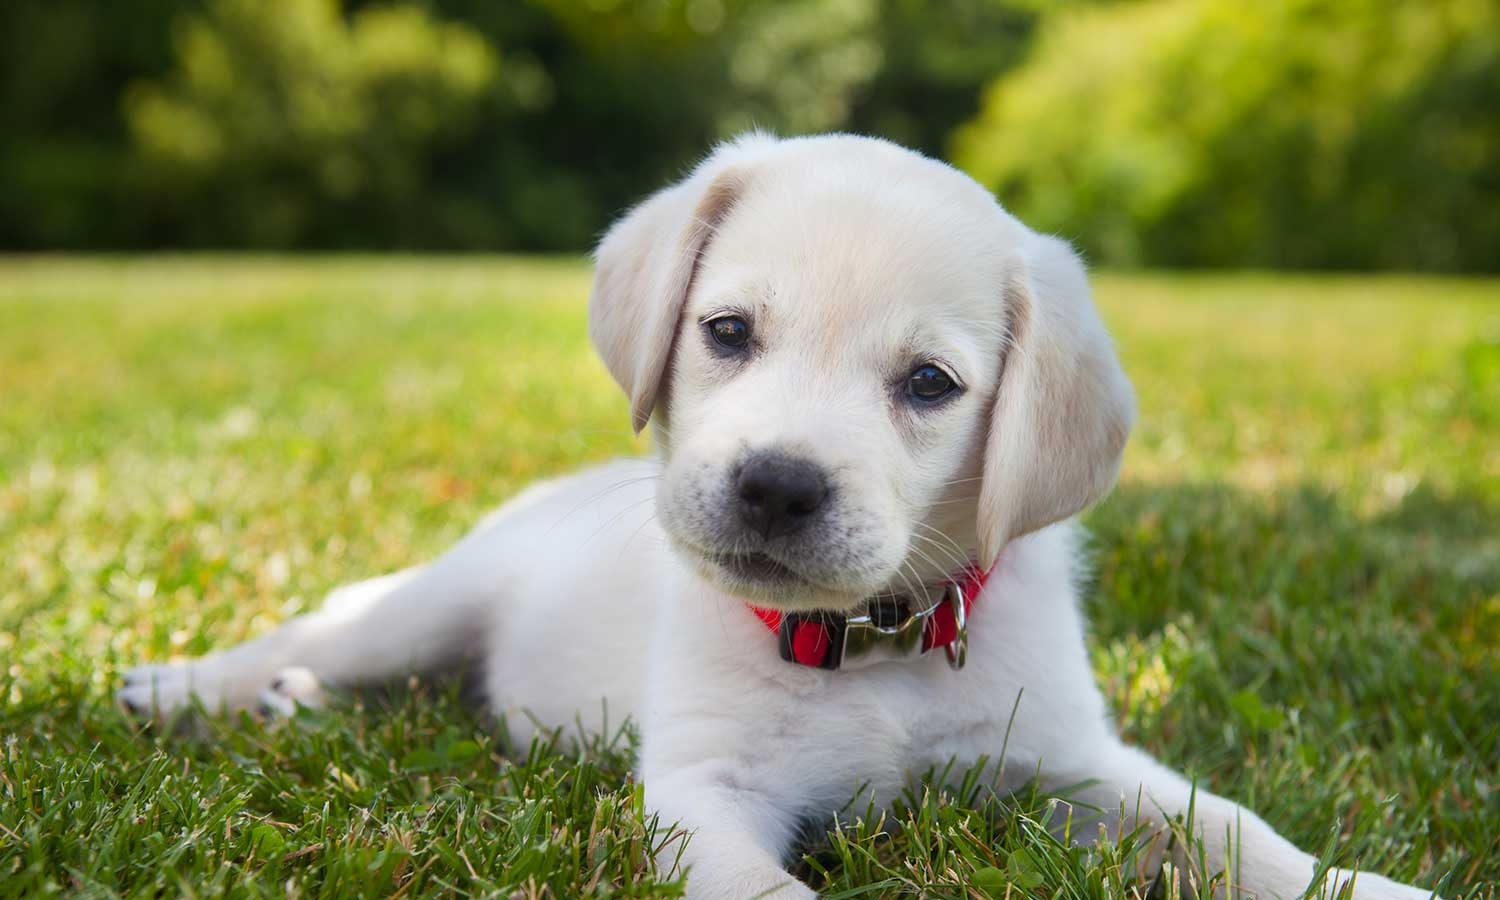 A yellow lab puppy